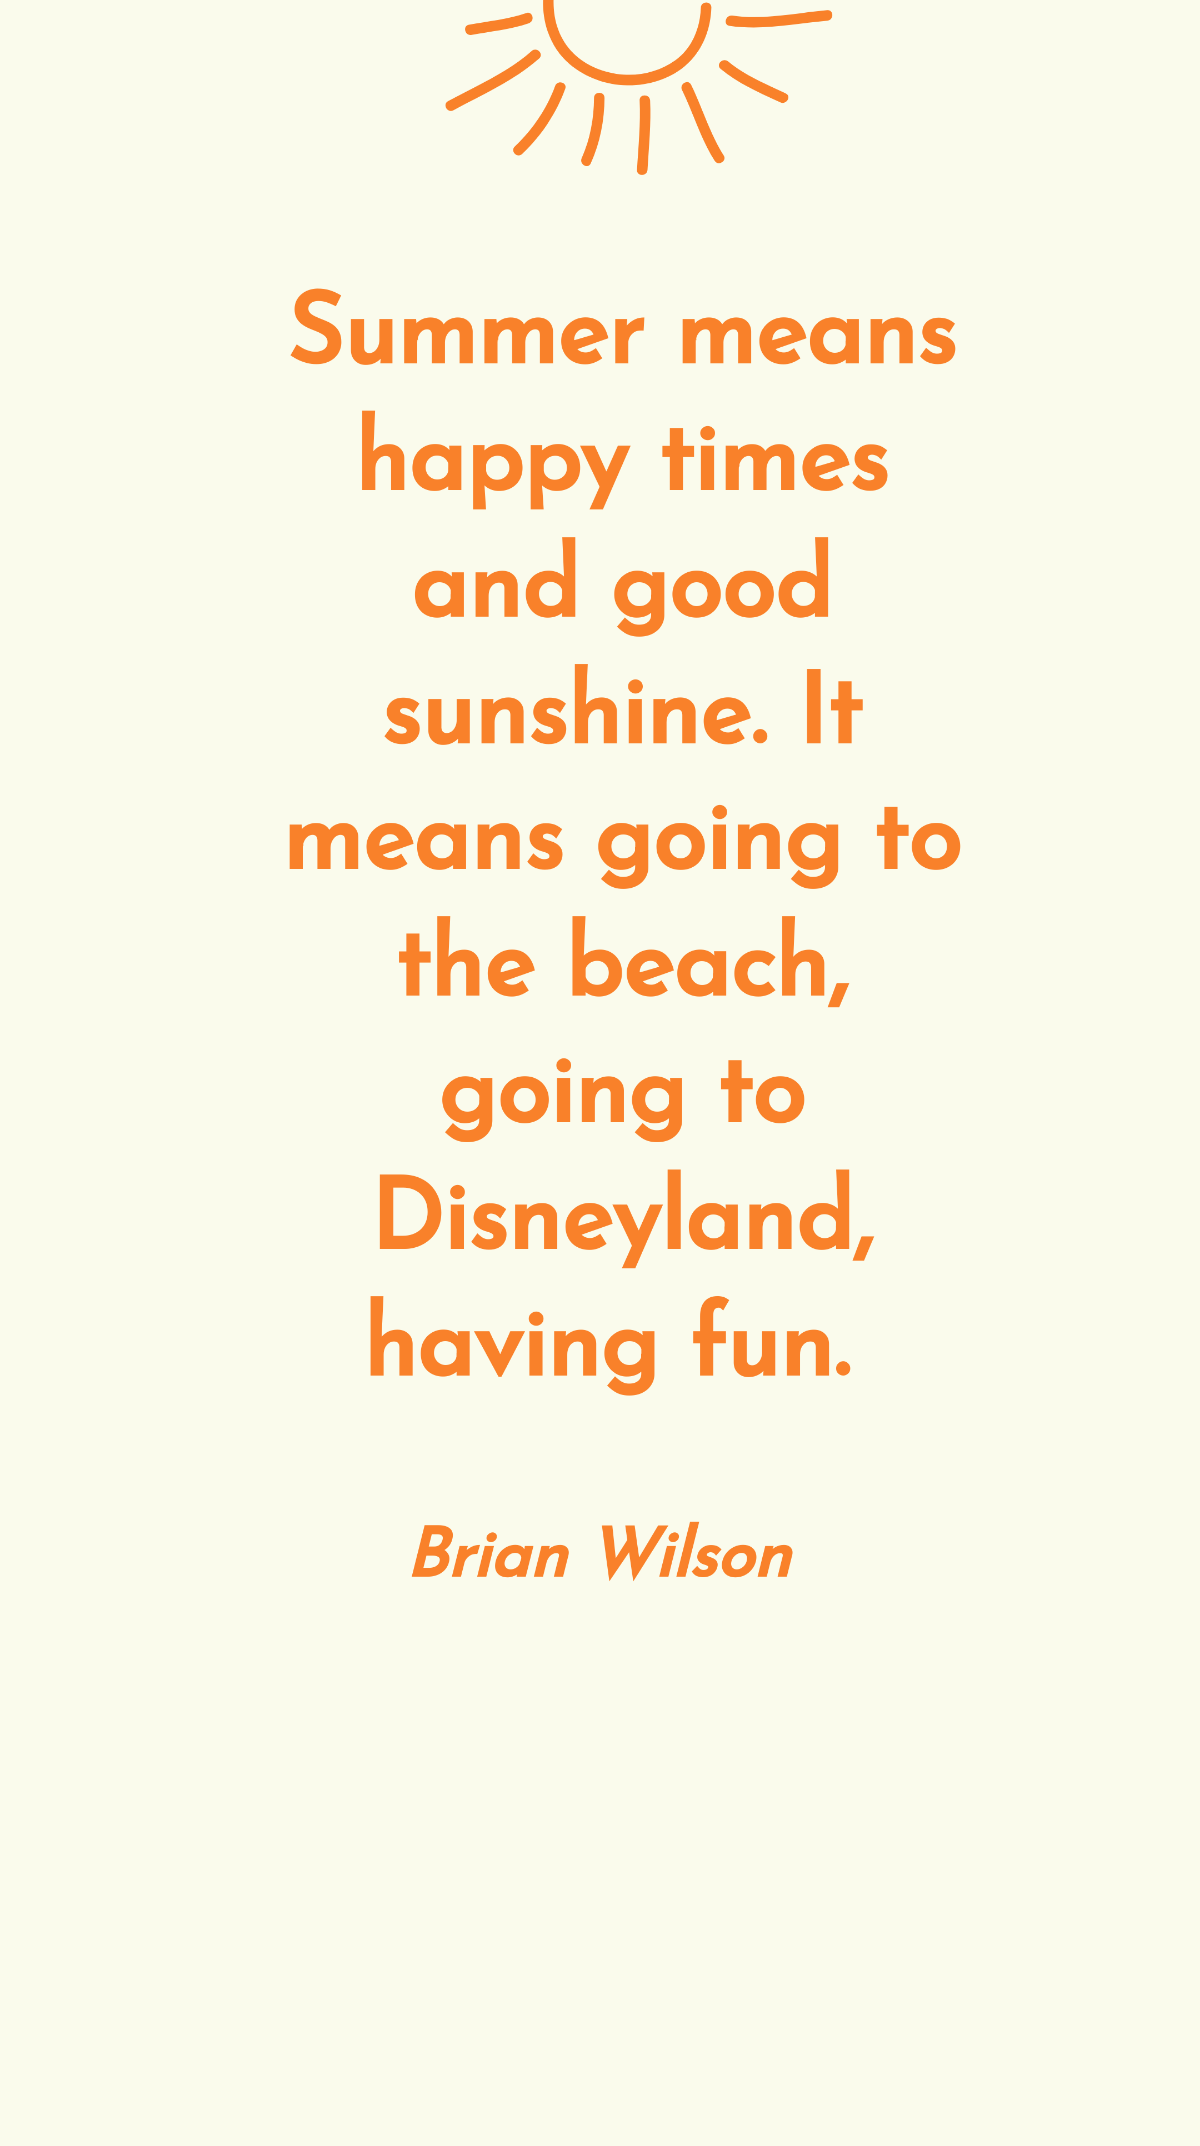 Brian Wilson - Summer means happy times and good sunshine. It means going to the beach, going to Disneyland, having fun. Template